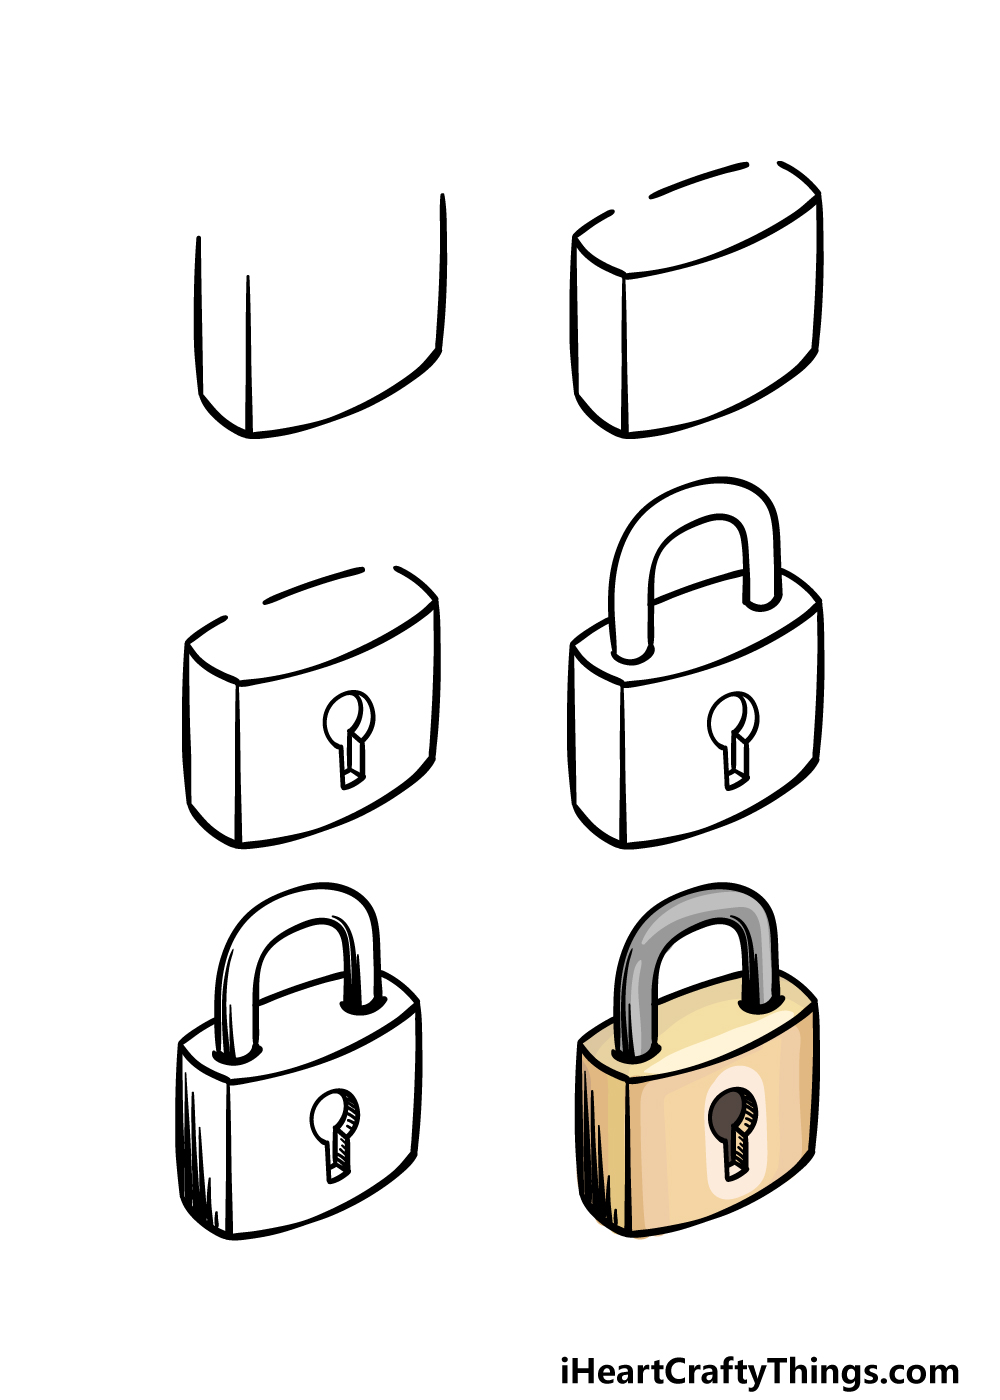 how to draw a Padlock in 6 steps